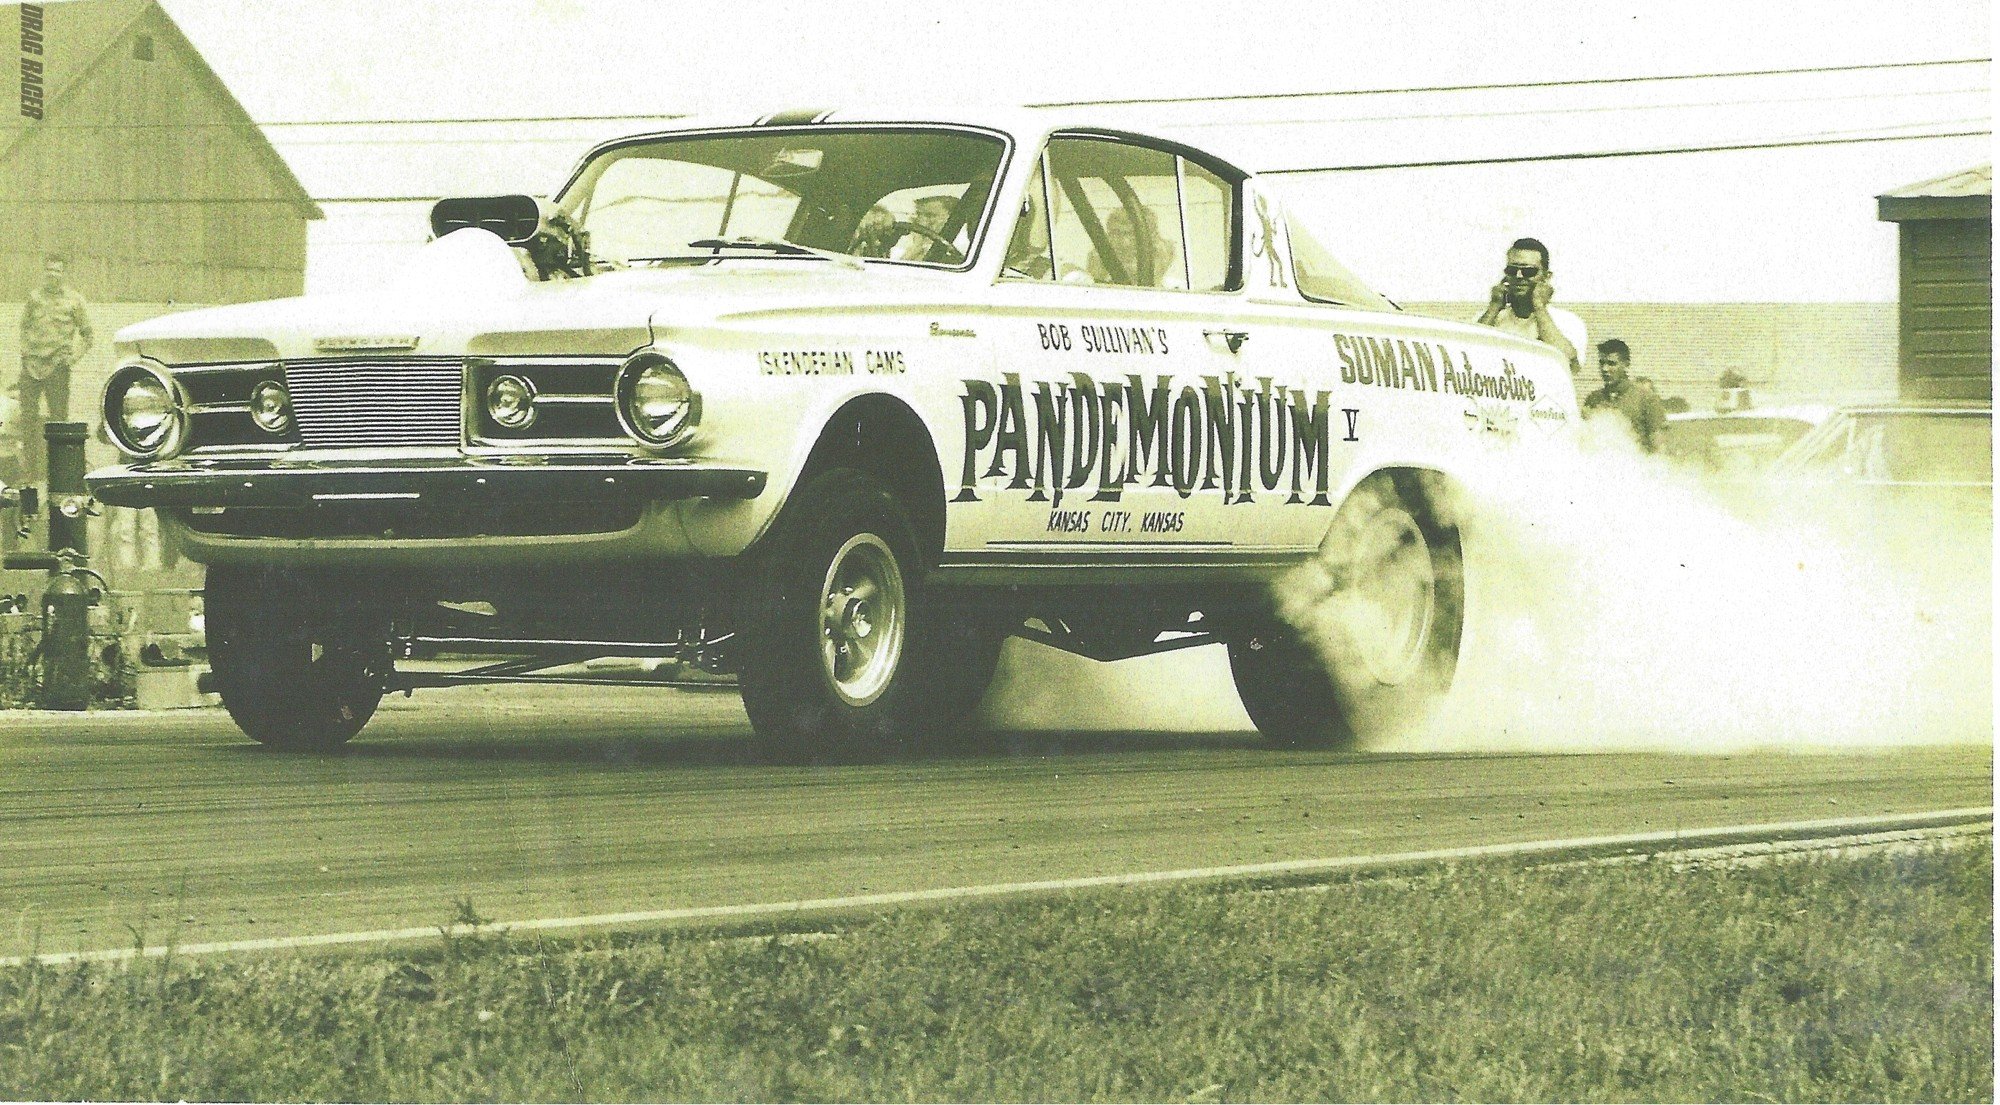 drag, Racing, Hot, Rod, Rods, Race, Plymouth Wallpaper